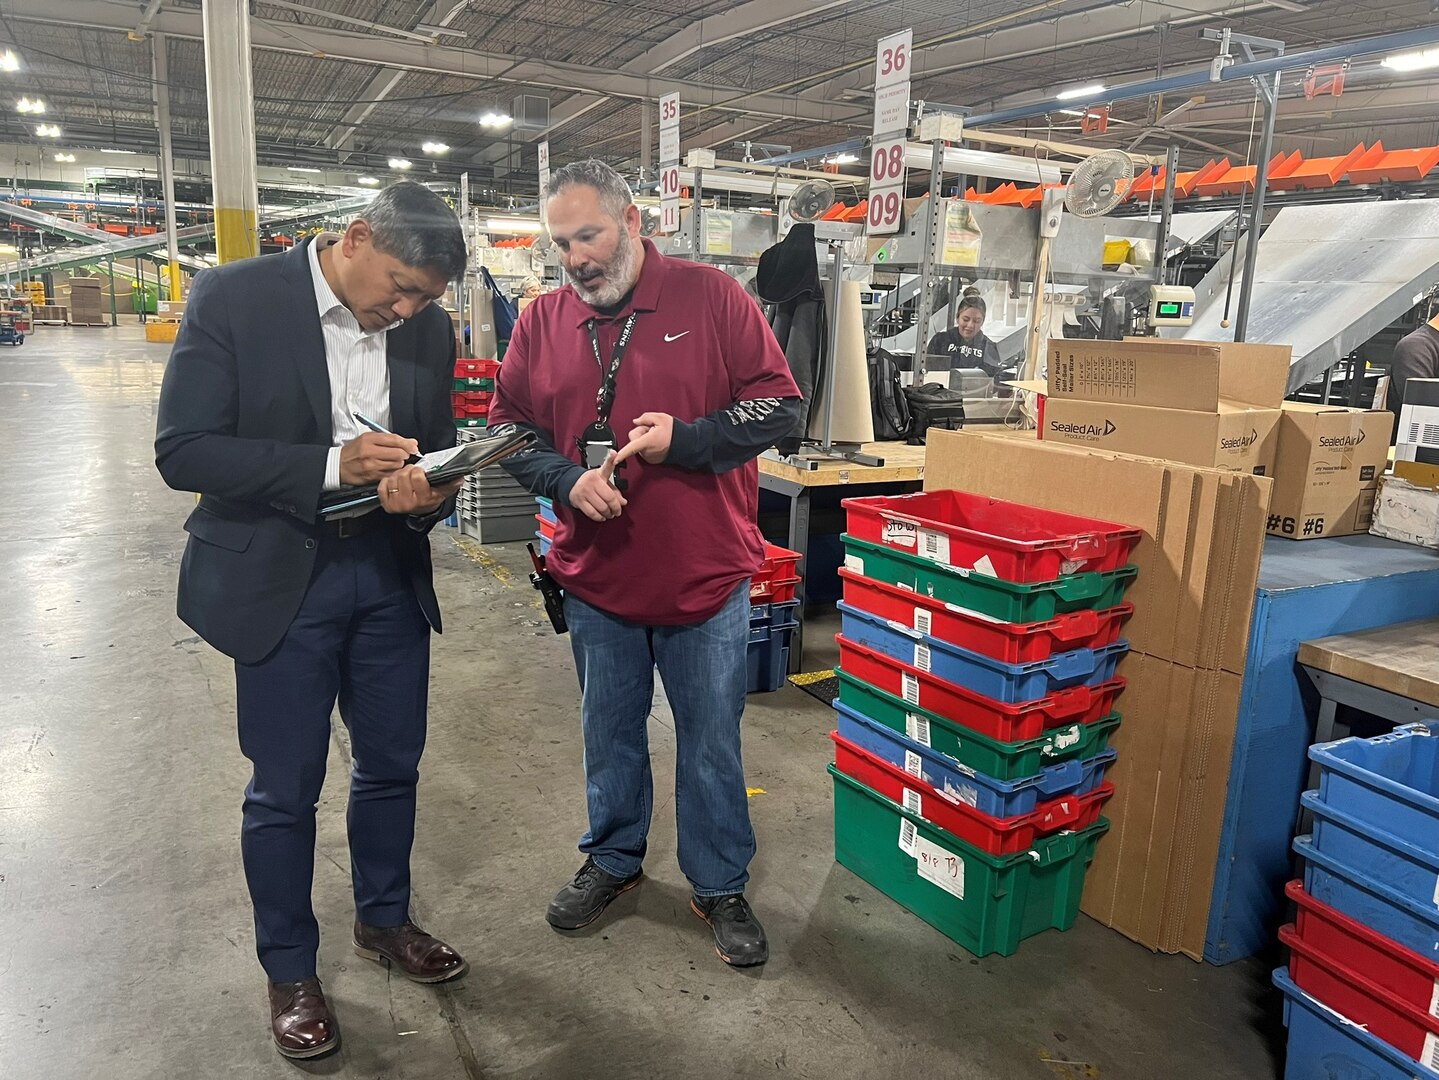 DDJC bin packing branch supervisor, Nicholas Kotta, explains a logistical process to Dr. 
Alejandro Hernandez during a tour on Nov. 16 at the DDJC installation in Tracy, California.